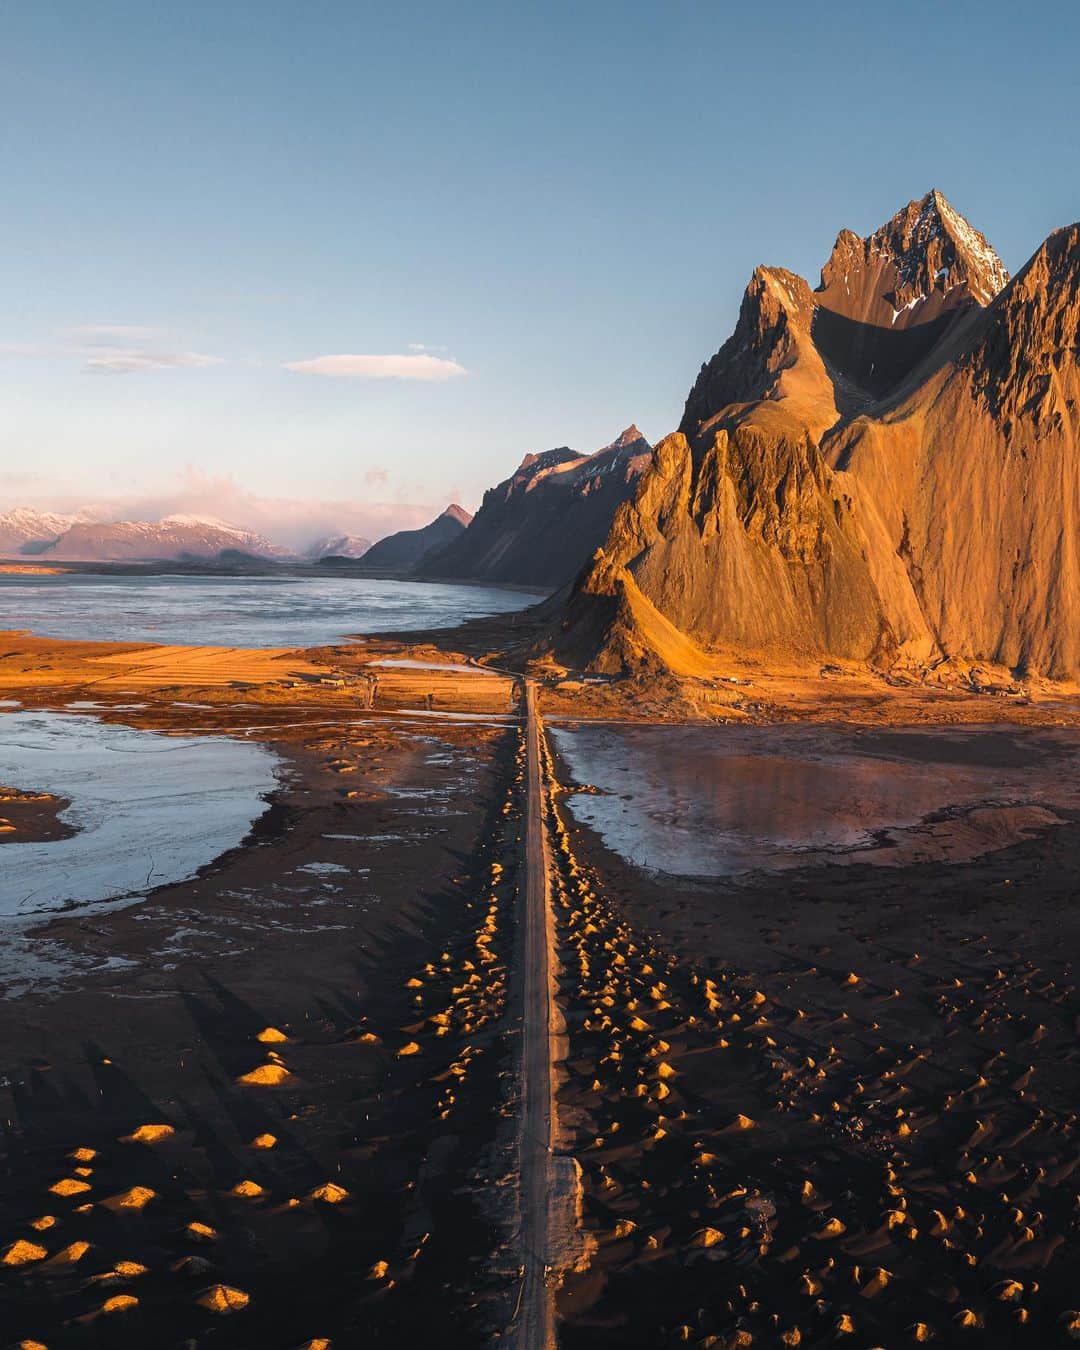 PolarProのインスタグラム：「Pick a path and follow it, don’t stop till you get where you want to be!   Are you on the path you want to be?   Using @polarpro ND4   #iceland #visiticeland #easticeland #icelandroadtrip #discovericeland #vestrahorn #wheniniceland #guidetoiceland #icelandicnature #igersiceland」